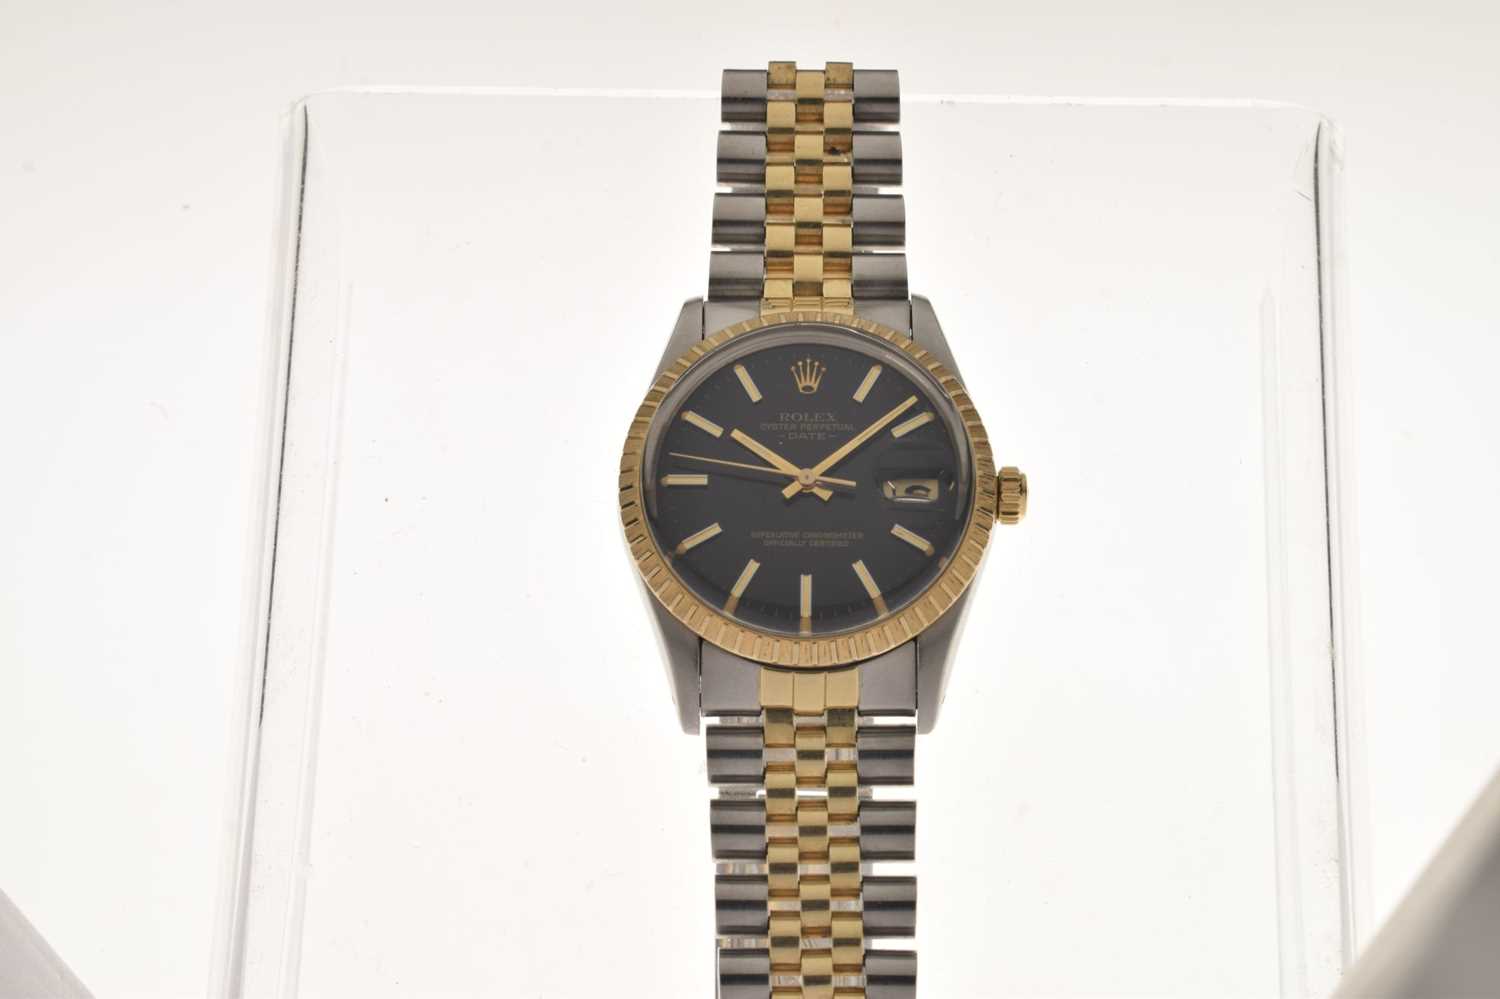 Rolex - Early 1980s Datejust Oyster Perpetual Superlative Chronometer - Image 16 of 16